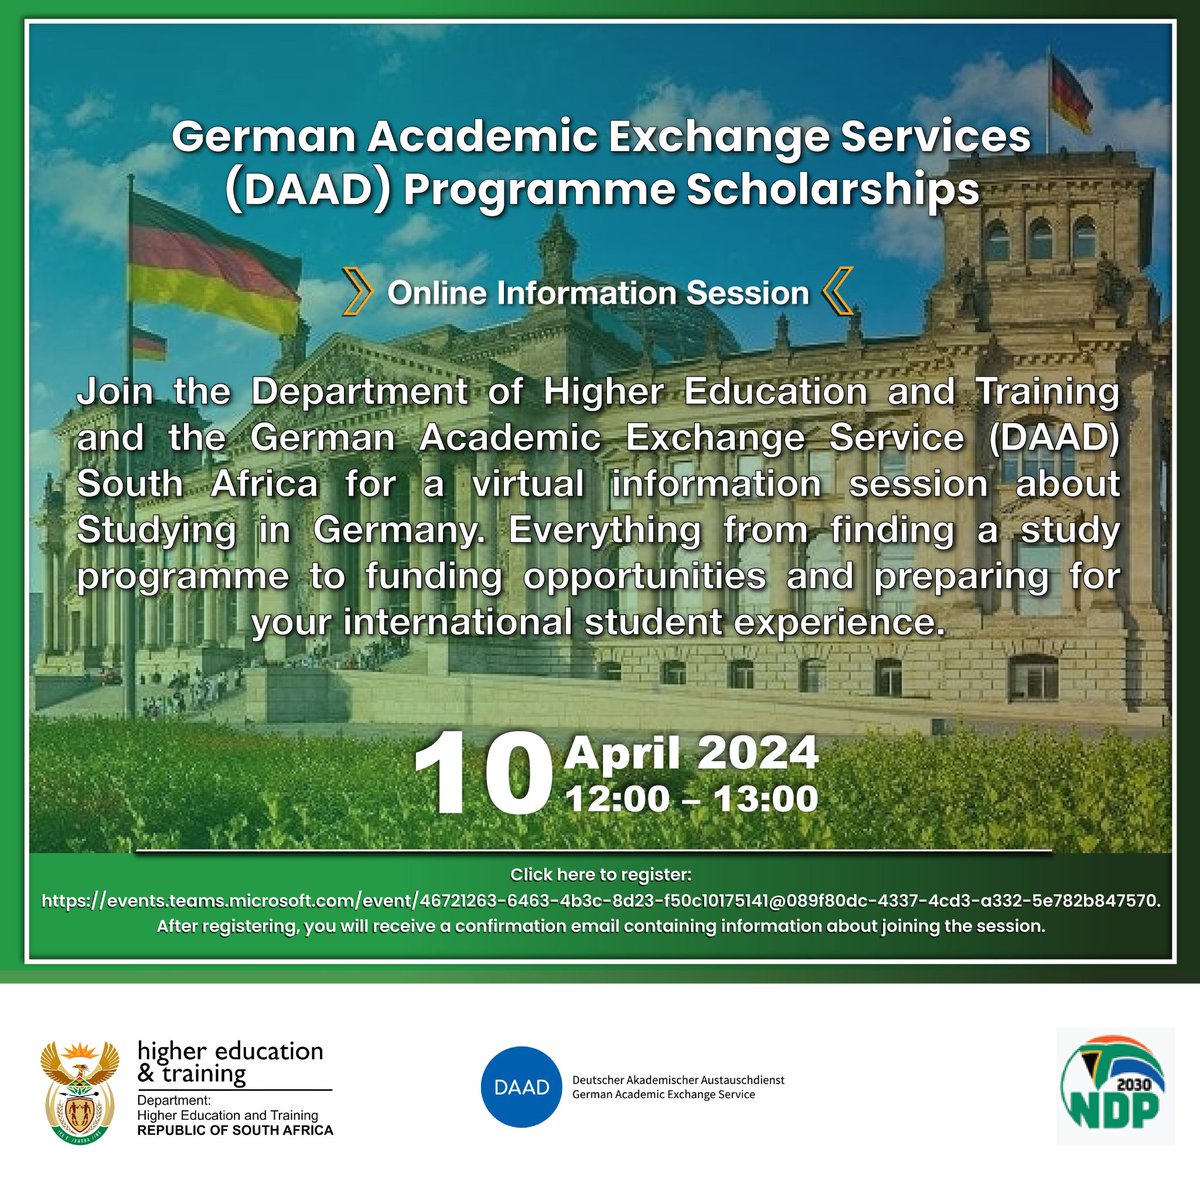 Join the Department of Higher Education and Training and the German Academic Exchange Service (DAAD) South Africa for a virtual information session about studying in Germany.

#InternationalScholarship